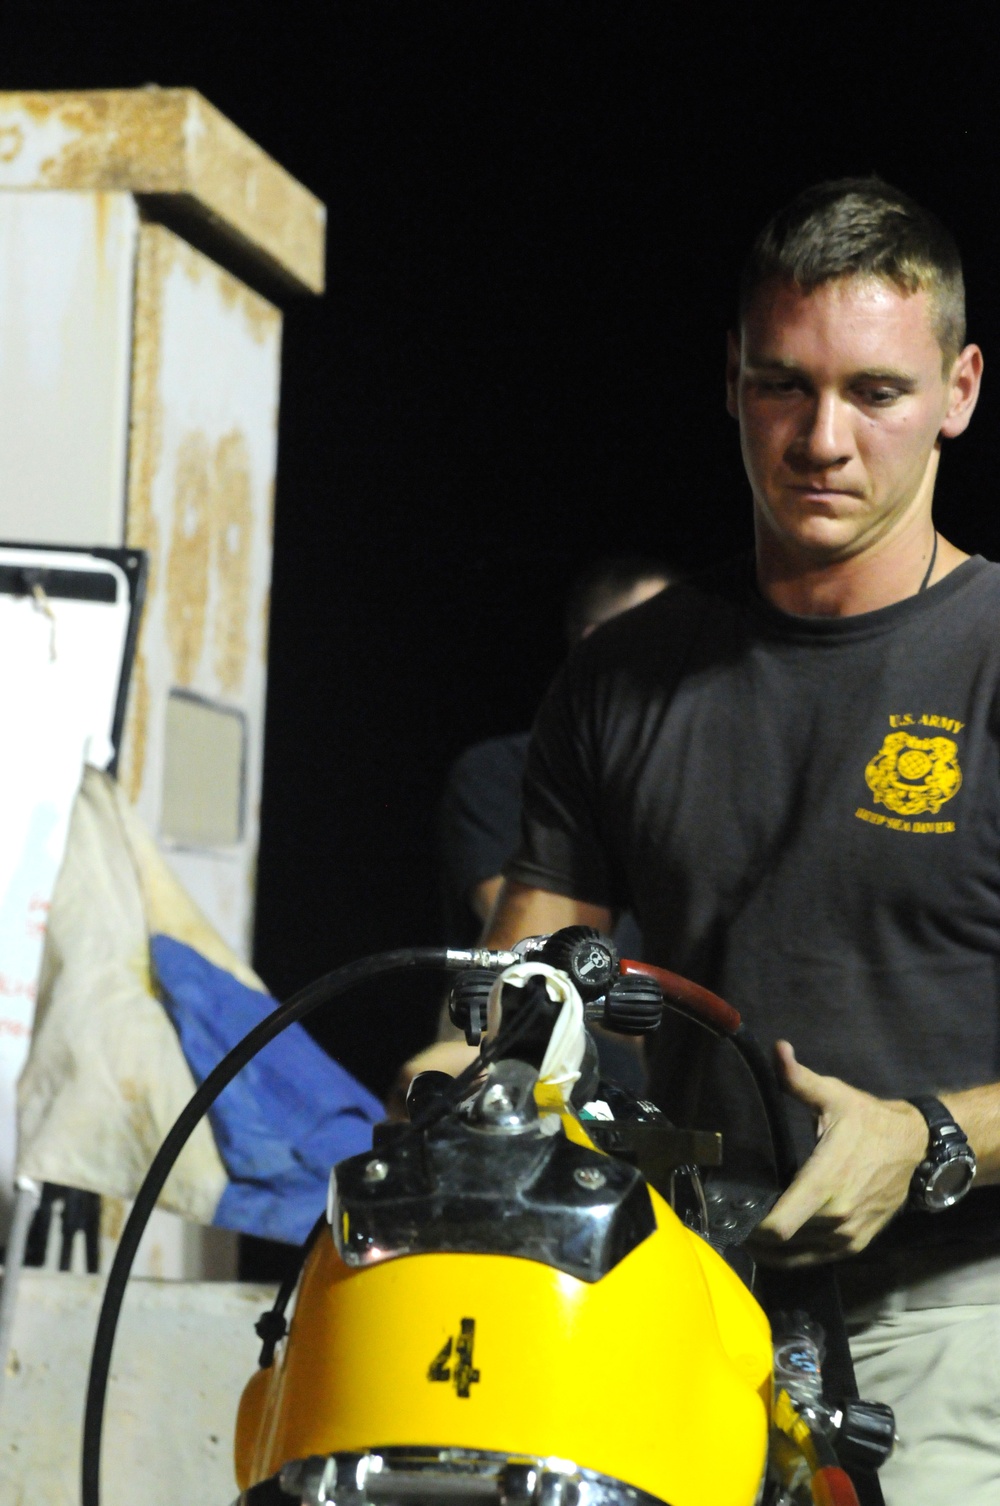 7th Engineer Dive Team conducts salvage diver qualifications